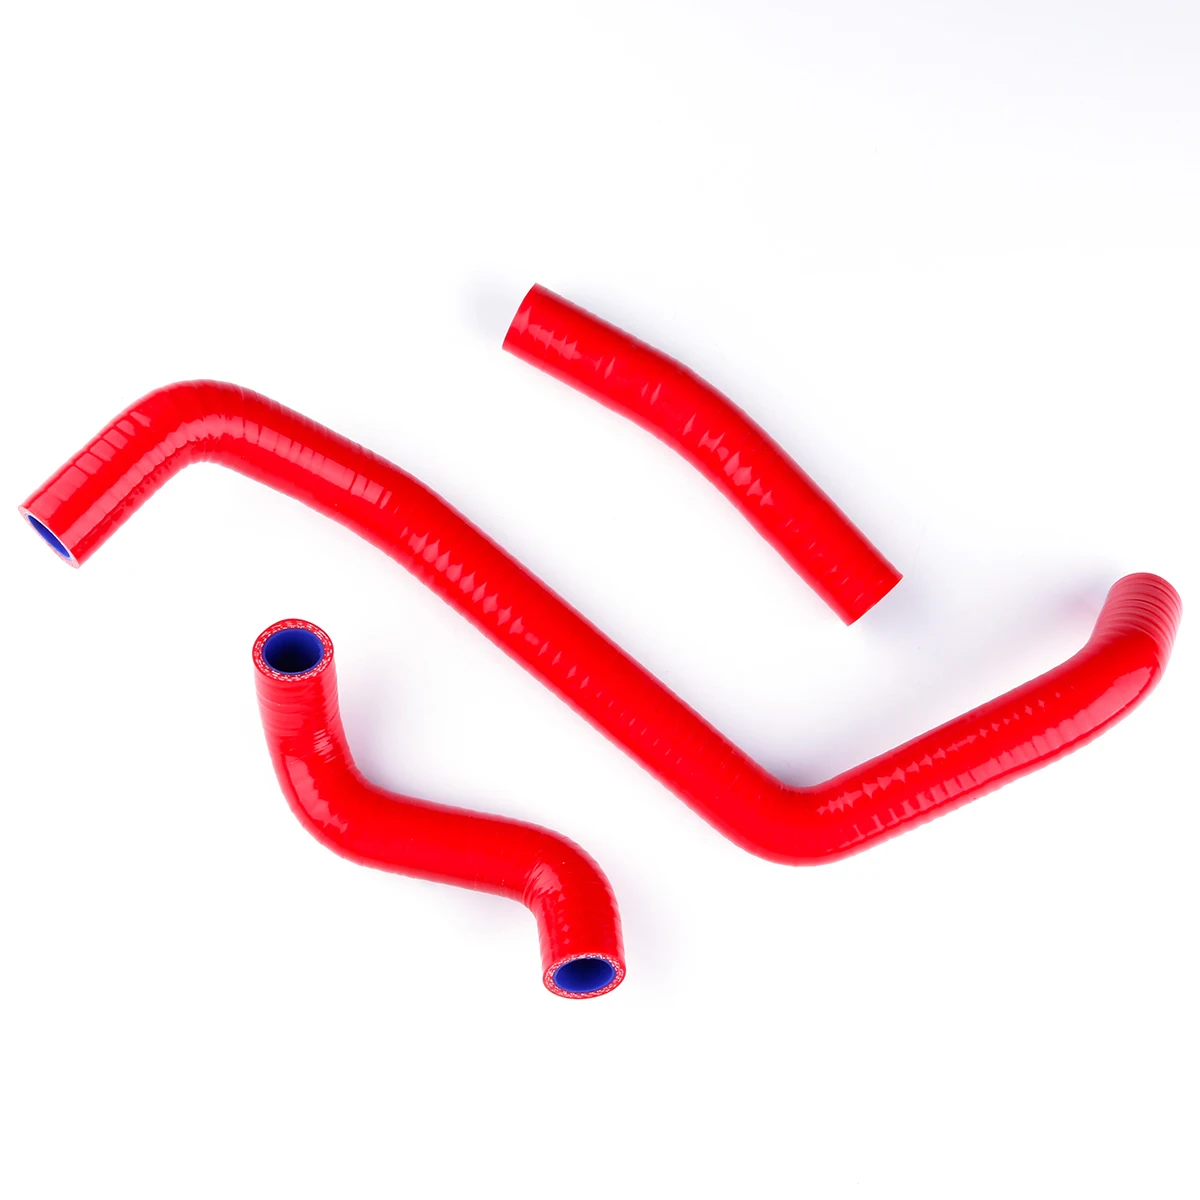 For Can-Am Bombardier DS 650 DS650  2000-2007 ATV Silicone Radiator Hose Tube Pipe Kit  01 02 03 04 05 06 big roller reinforced one way starter spraq clutch bearing for bombardier brp can am ds650 2000 2008